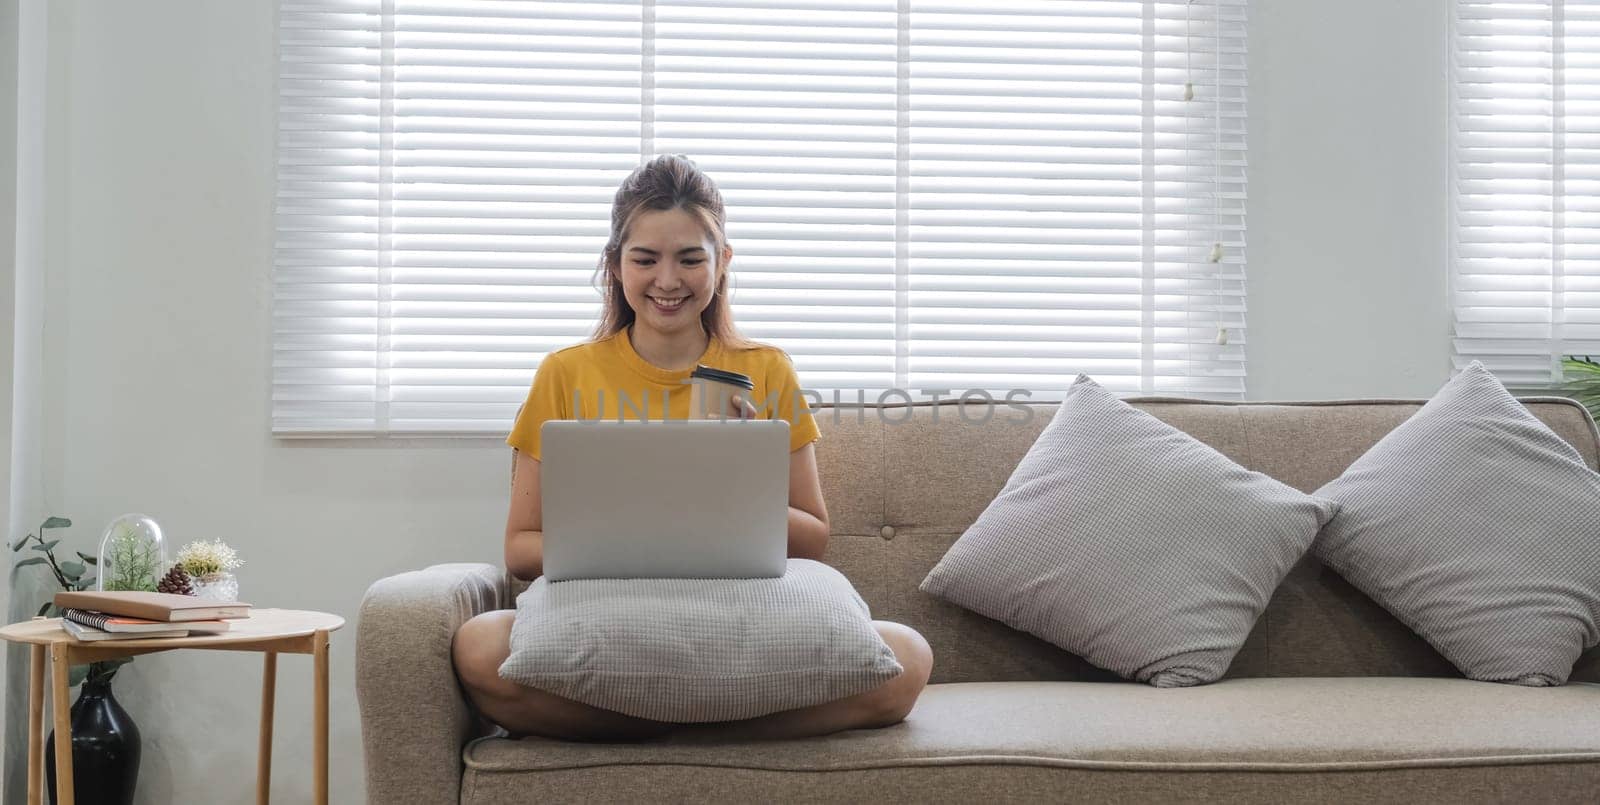 A woman is sitting on a couch with a laptop in front of her. She is smiling and holding a cup. Concept of relaxation and leisure